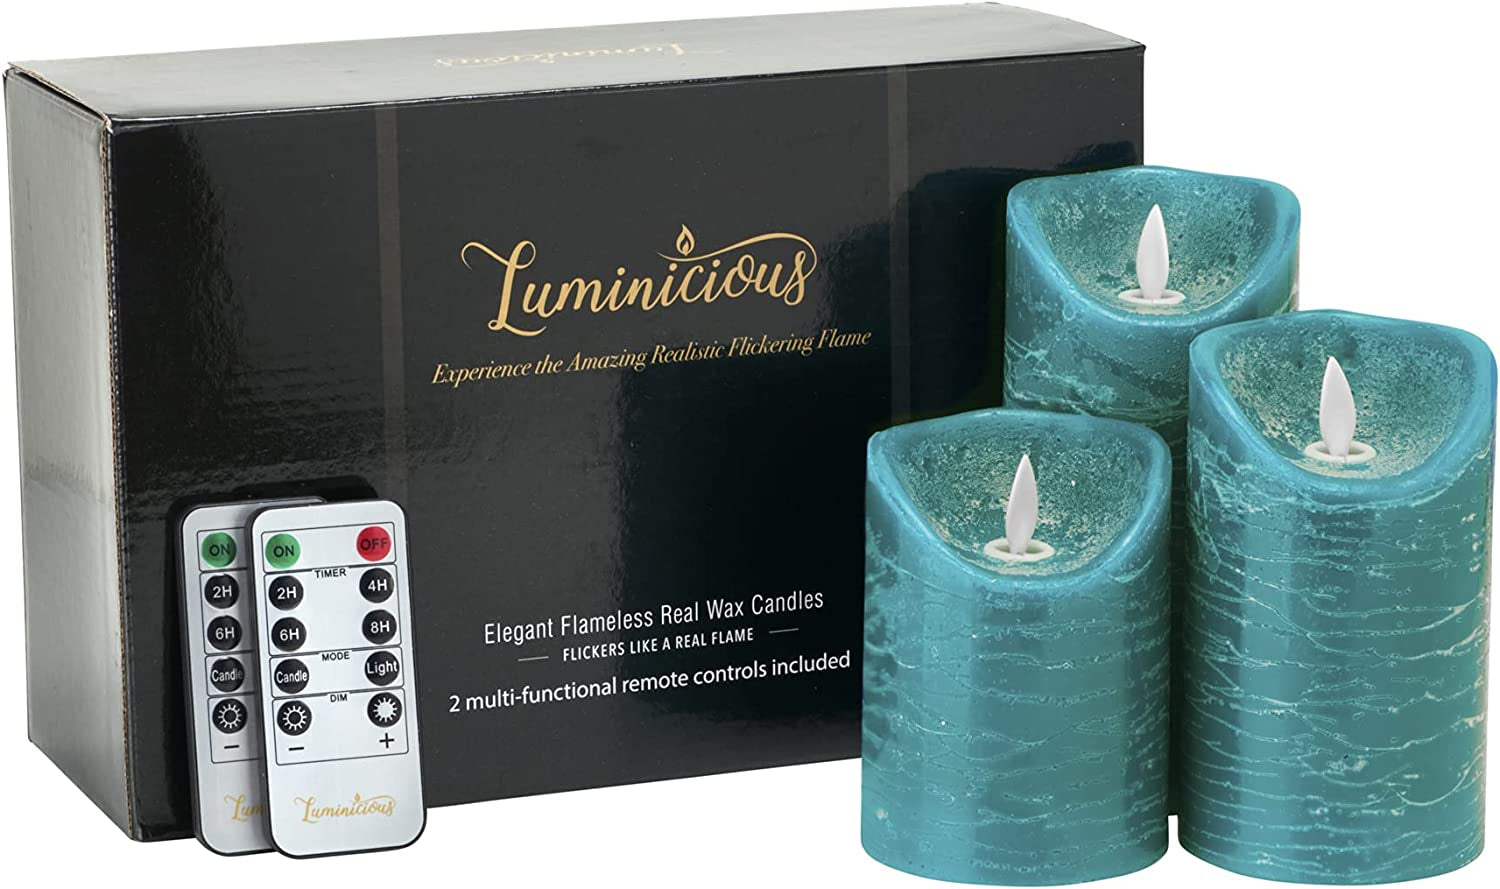 Luminicious, Flameless Candles Flickering LED | Battery Operated Electric Pillar Candle | Realistic Moving Flame Flicker with Remote Control & Timer | Real Wax Tempo Teal | Great Home Decor | Decorative Gift